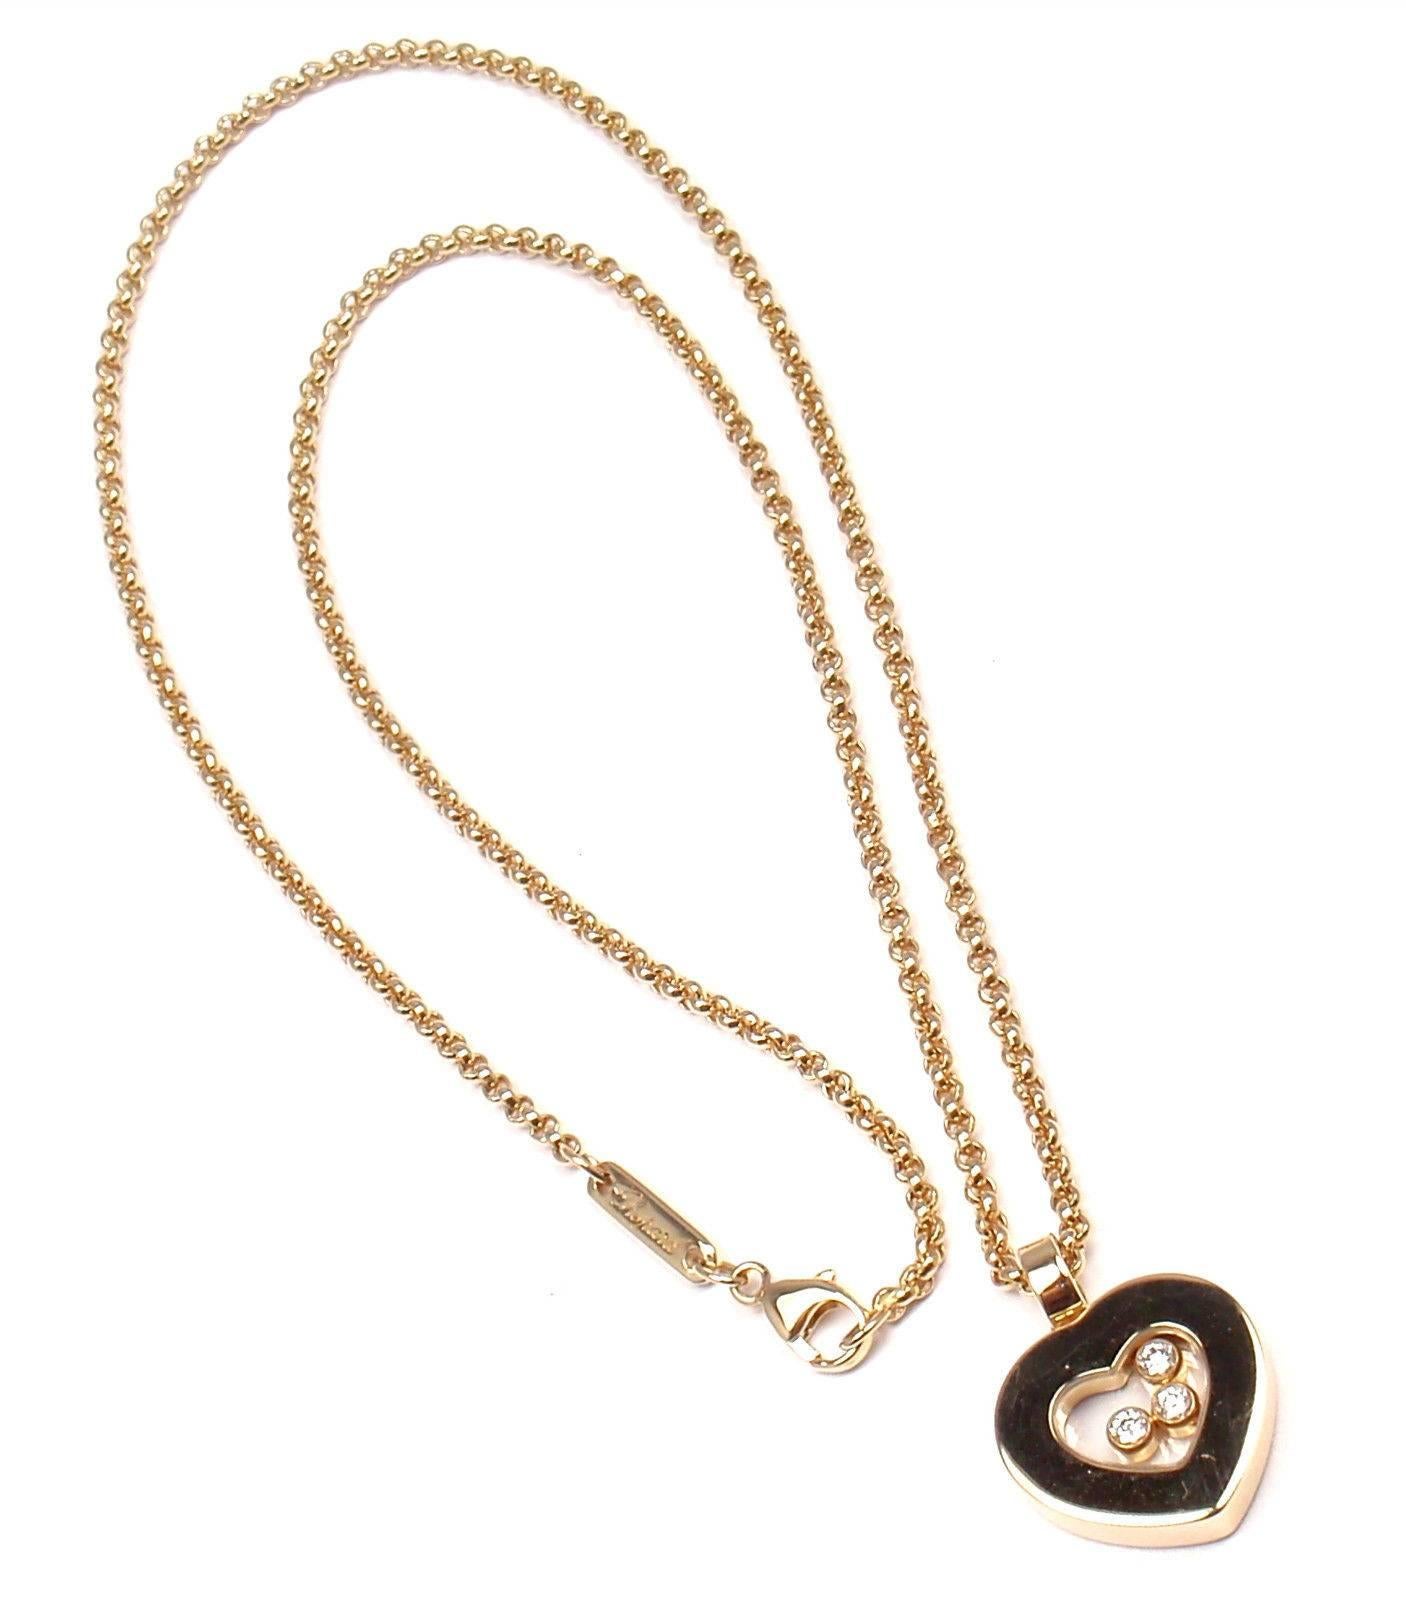 18k Yellow Gold Happy Diamond Heart Pendant Necklace  by Chopard.  With 3 Round Brilliant Cut Diamonds VS1 total weight approx. .17ct
Details: 
Chain Length: Length: 17